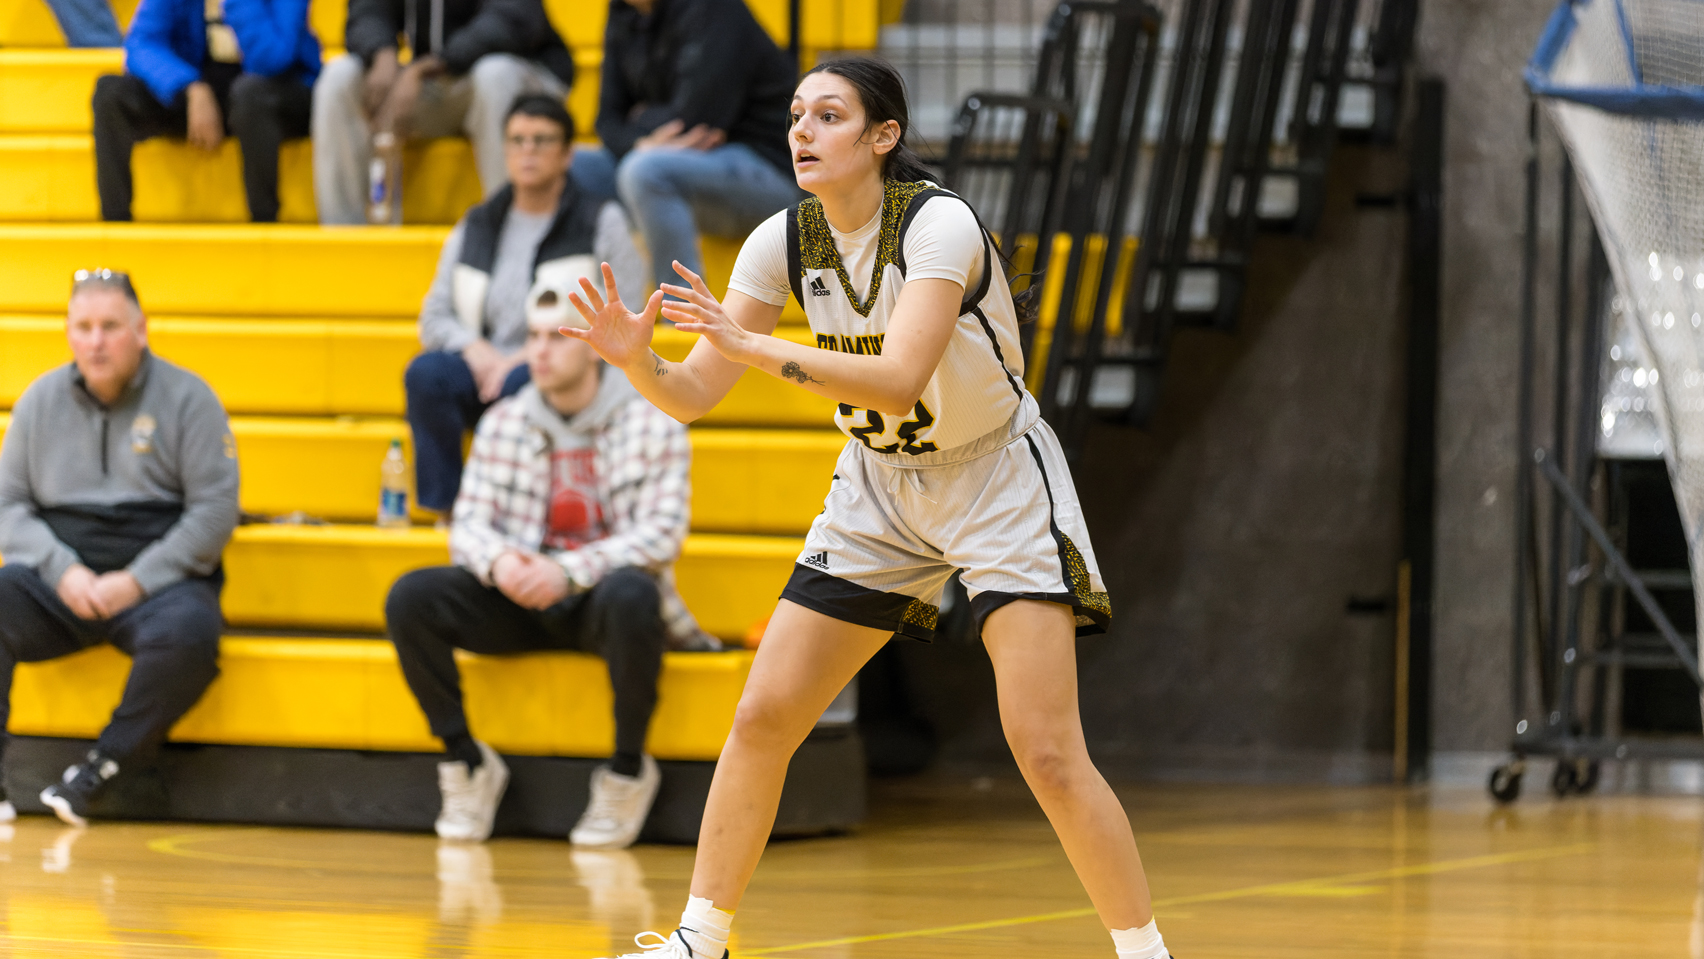 Women’s Basketball Cruises to Victory over MCLA in MASCAC Action